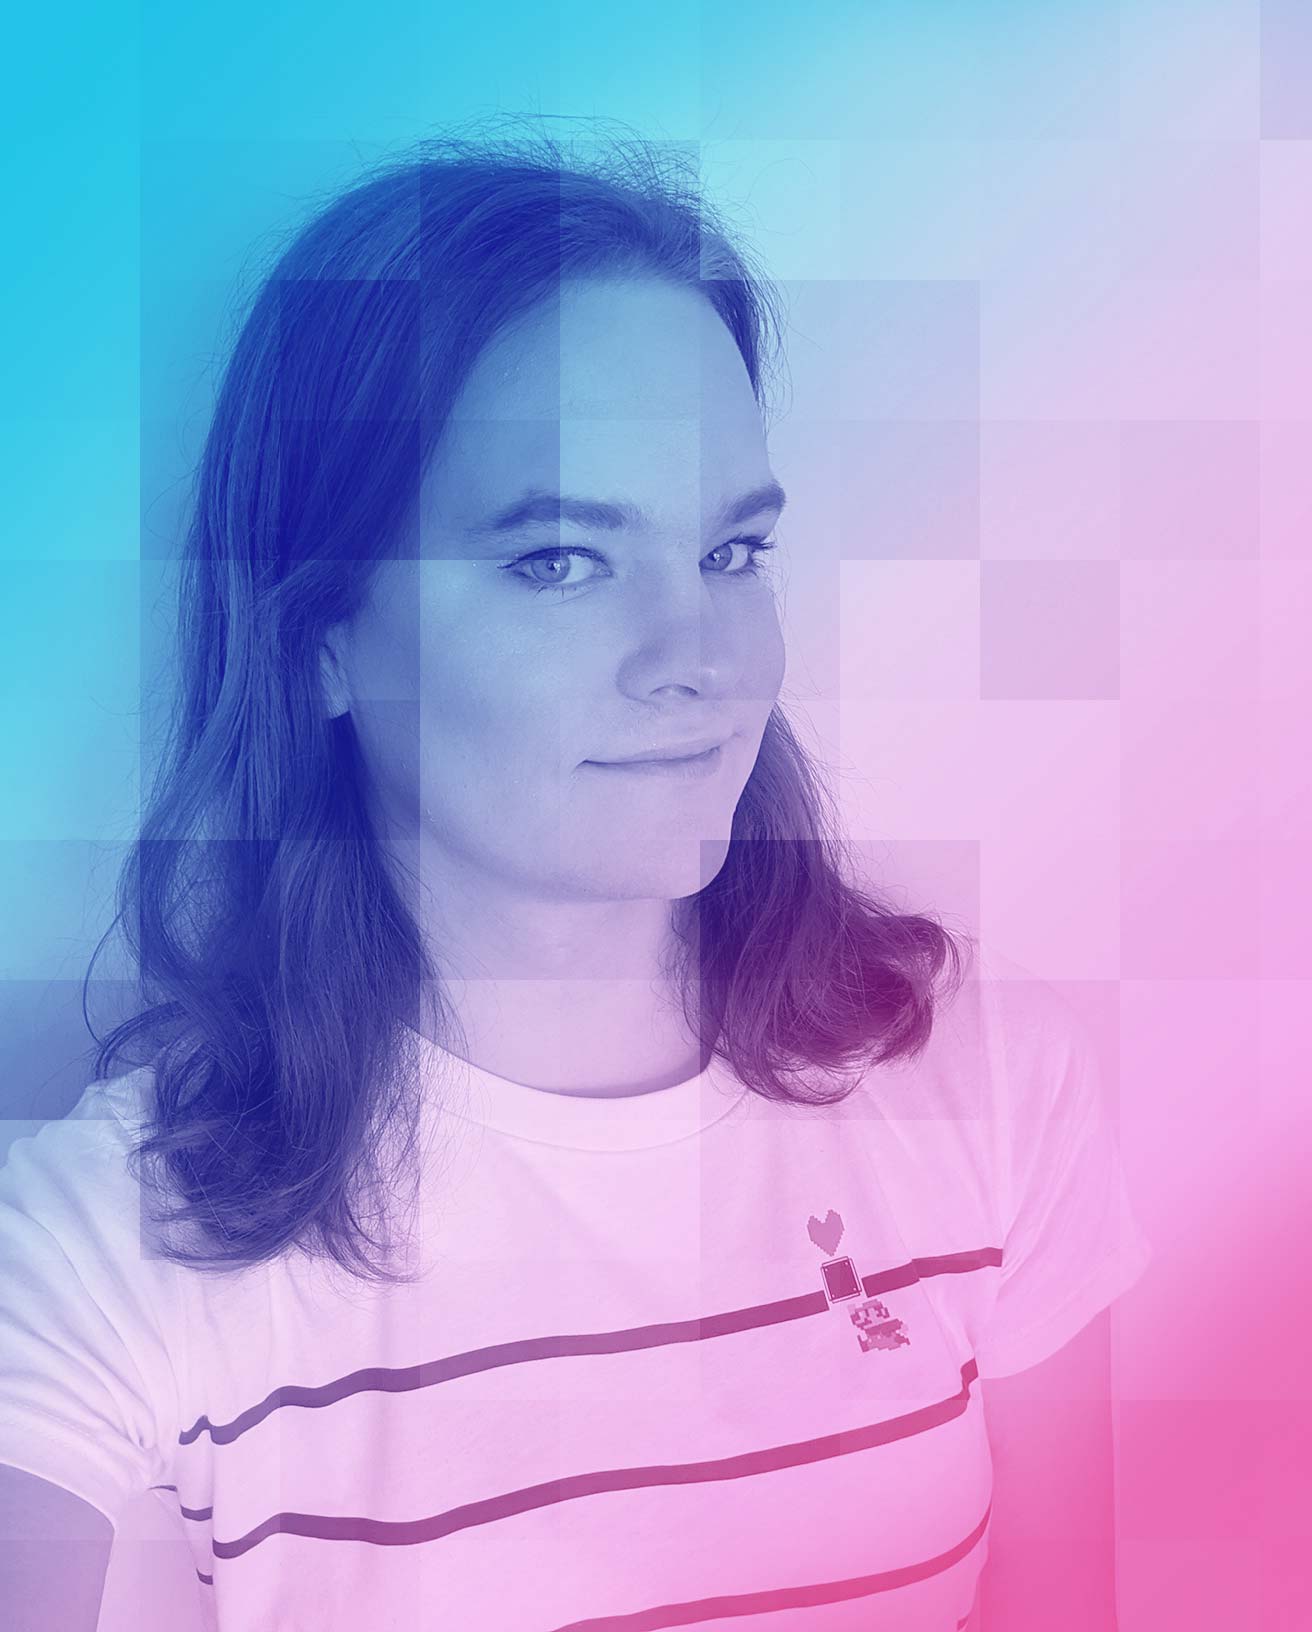 Photo of Jon, with a pink and blue overlay with pixel pattern effect.